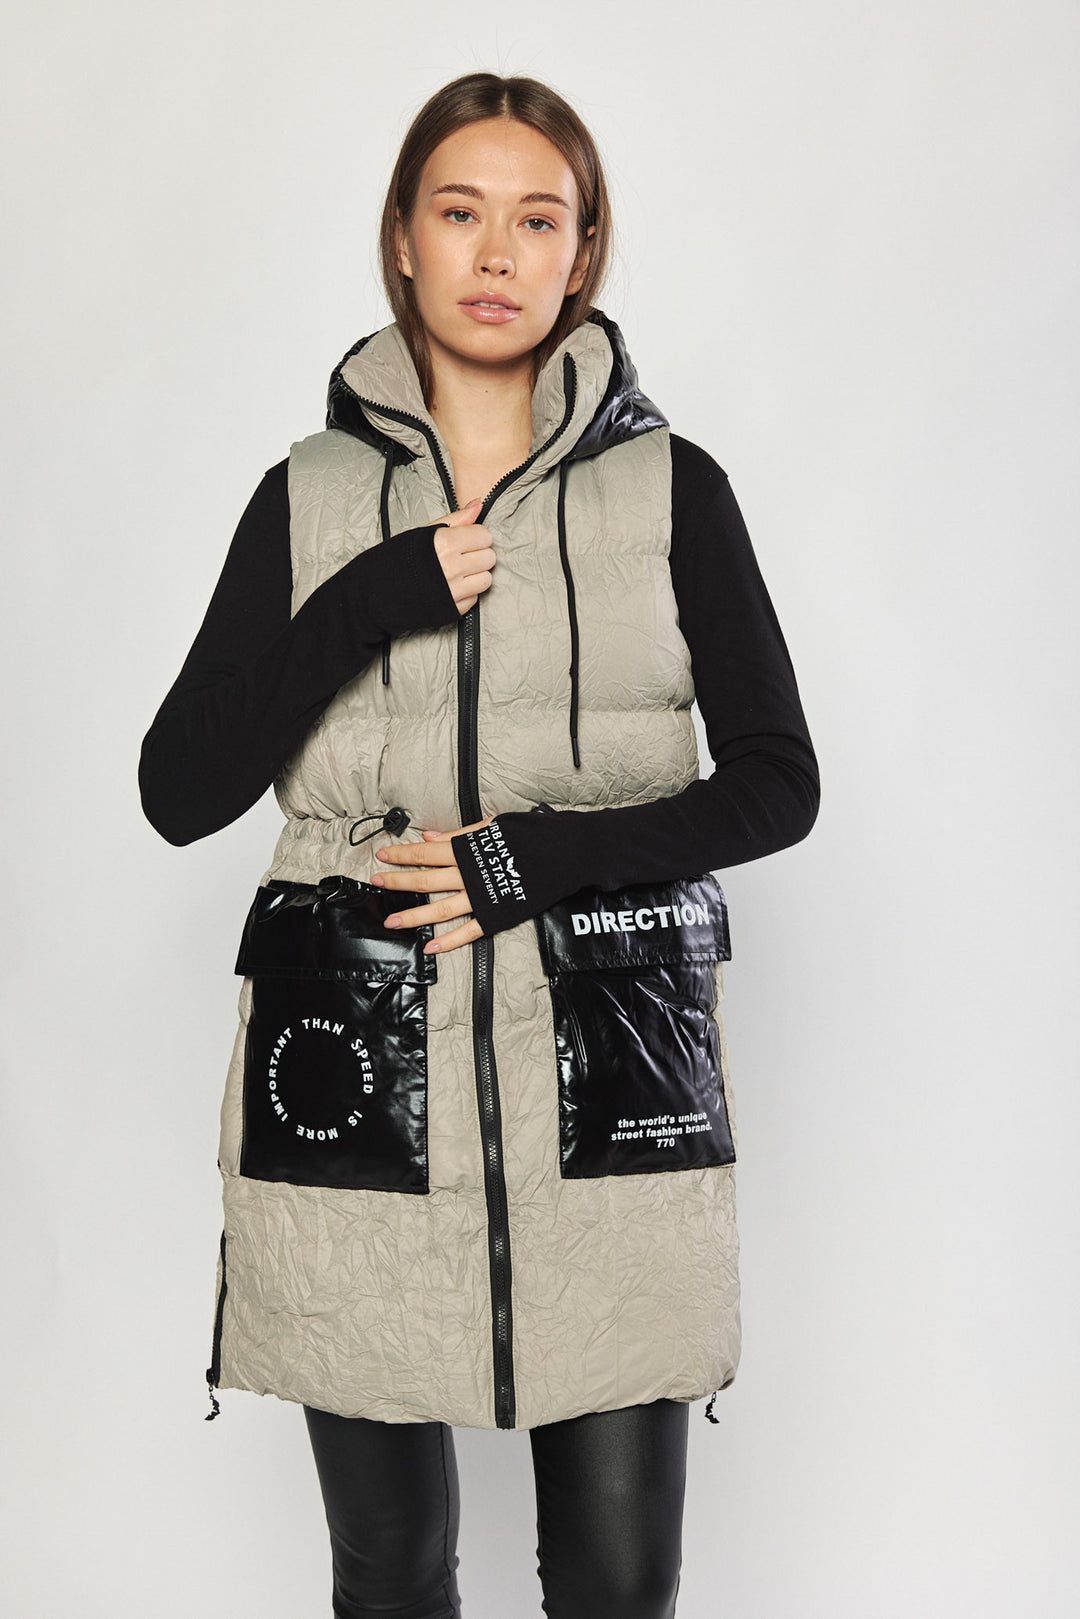 Elevate Your Look with the Direction Vest at Runway Secrets